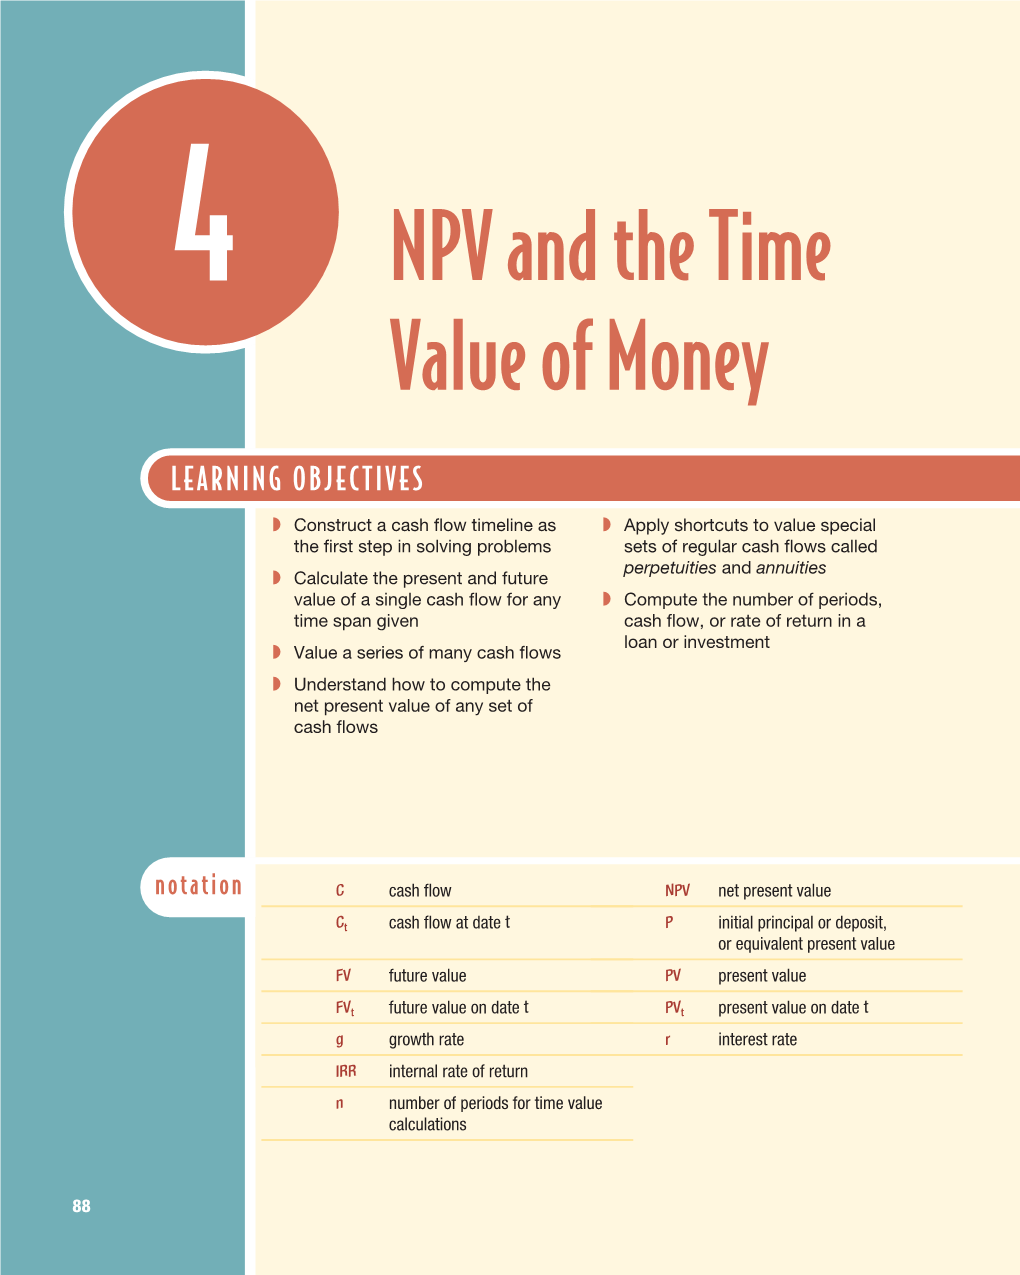 NPV and the Time Value of Money 91